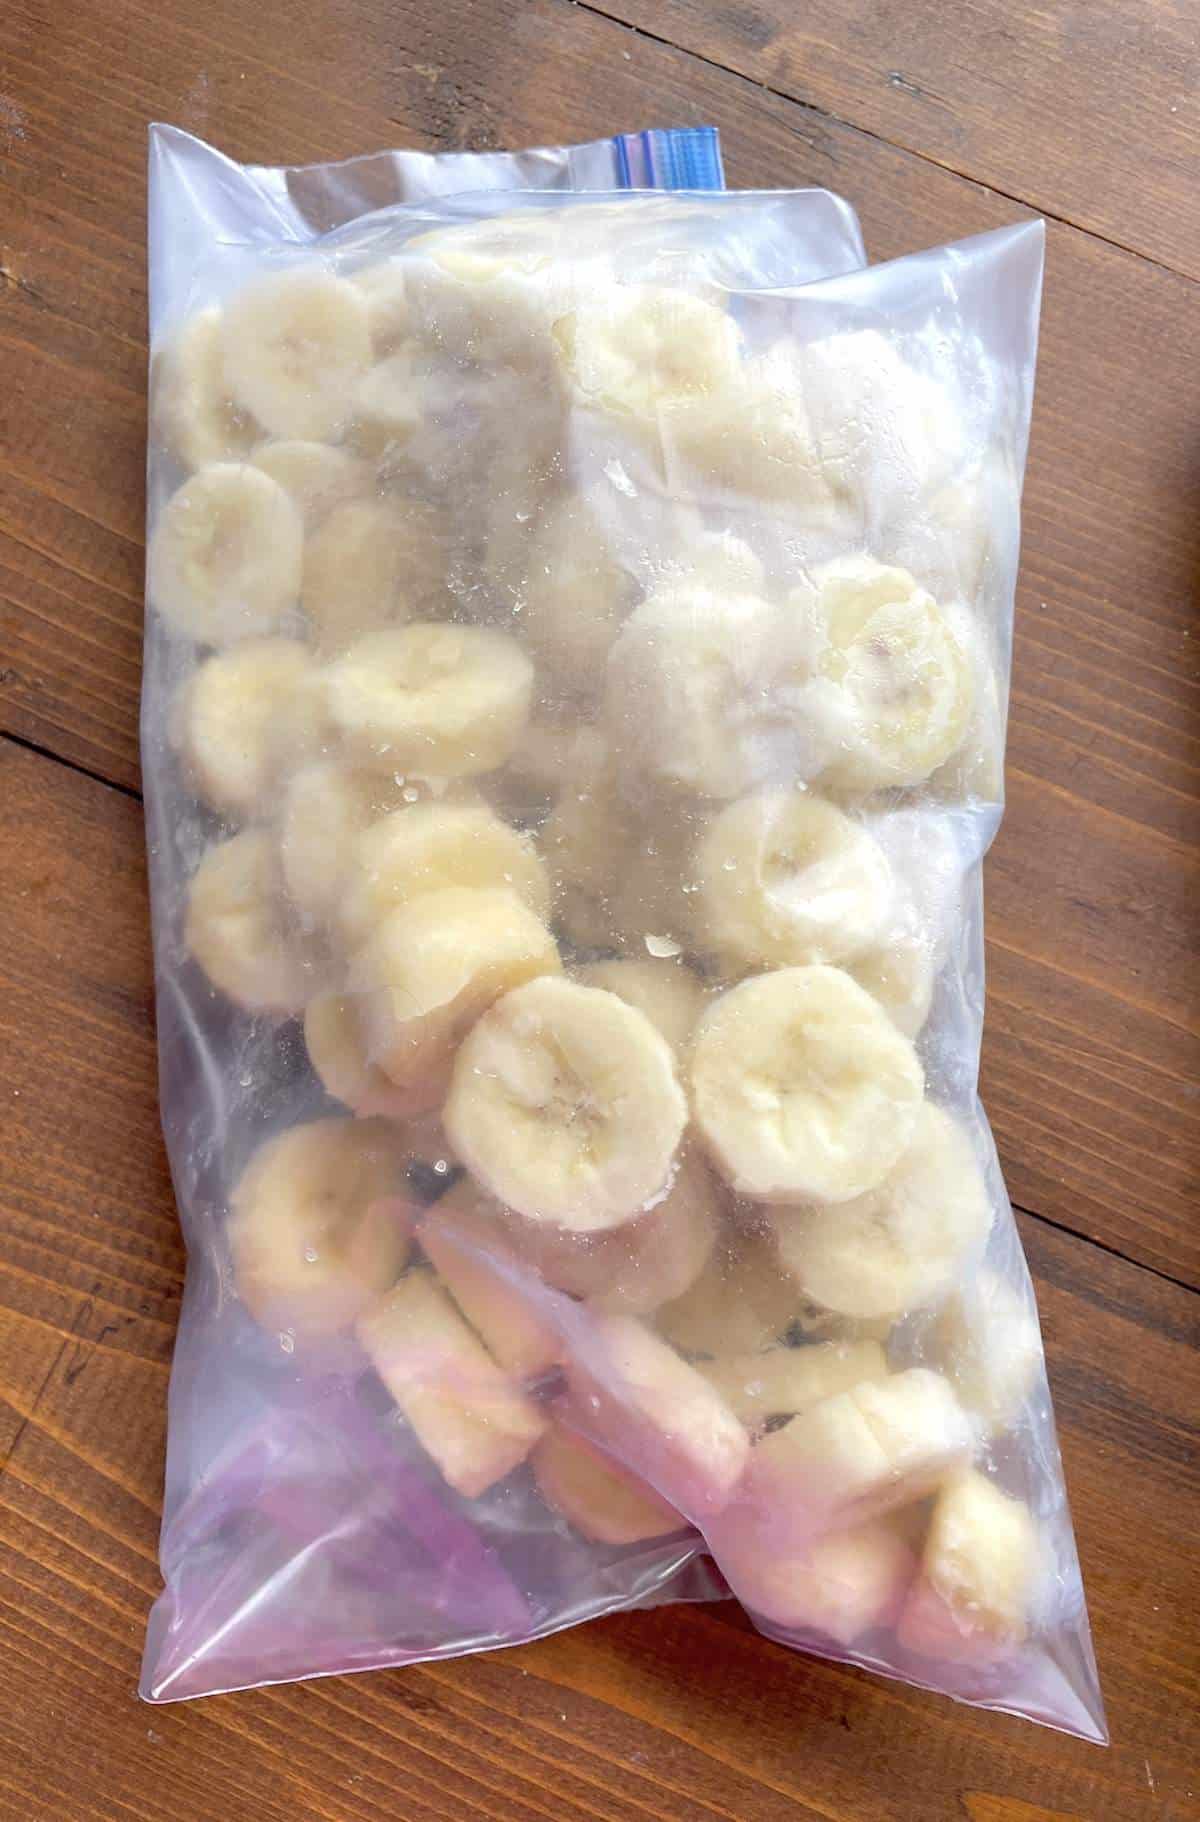 A bag of frozen banana slices prepped for smoothies.